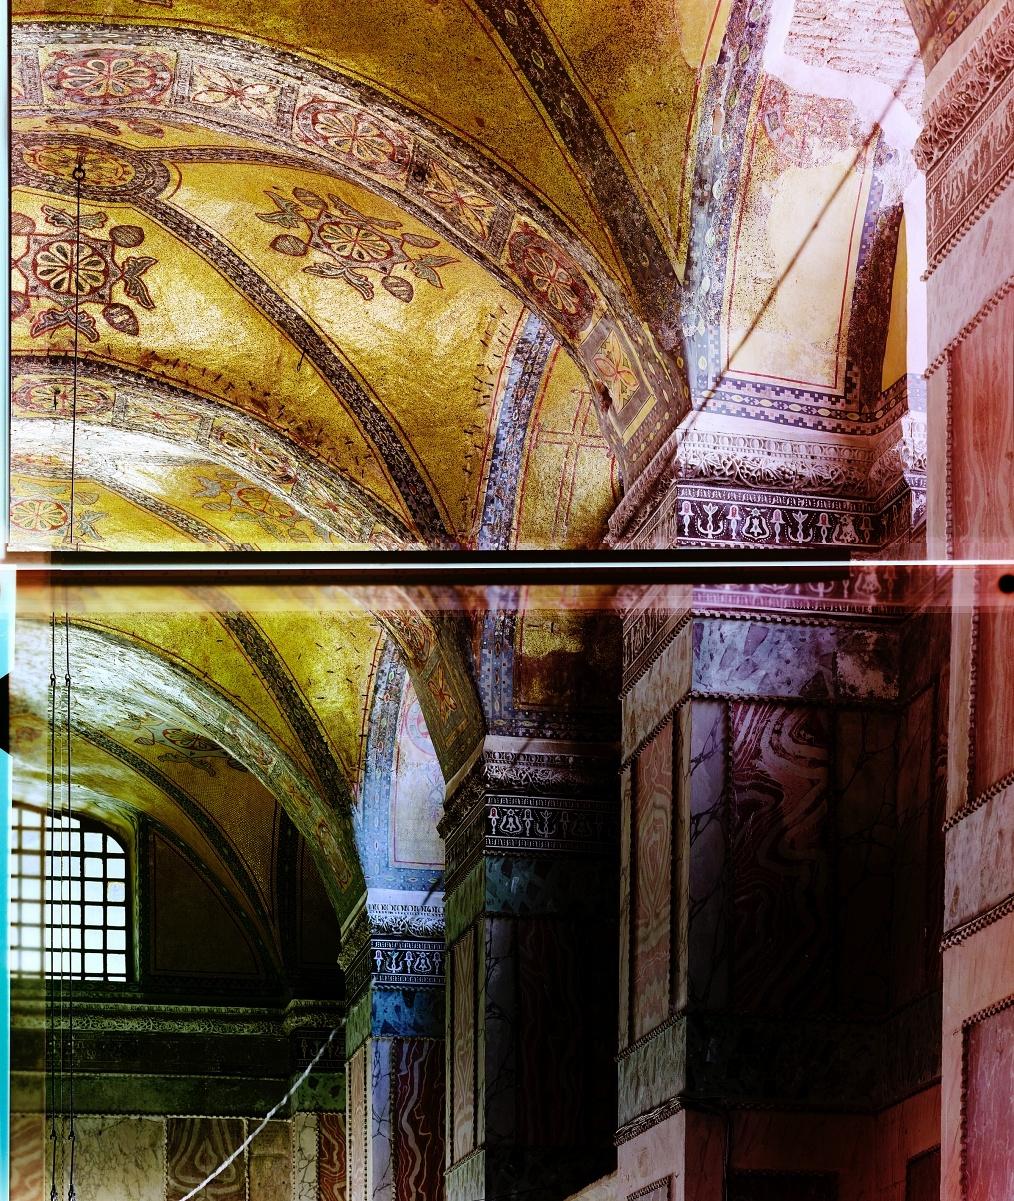 Ola KOLEHMAINEN (*1964, Finland)
Hagia Sophia 537 AD XI, 2014
C-print mounted on composite sheet in Artist Frame
Sheet 140 x 175 cm (55 1/8 x 68 7/8 in.)
Edition of 4, plus 2 AP; Ed. no. 1/4
Framed print

About Sacred Places: 

With the series